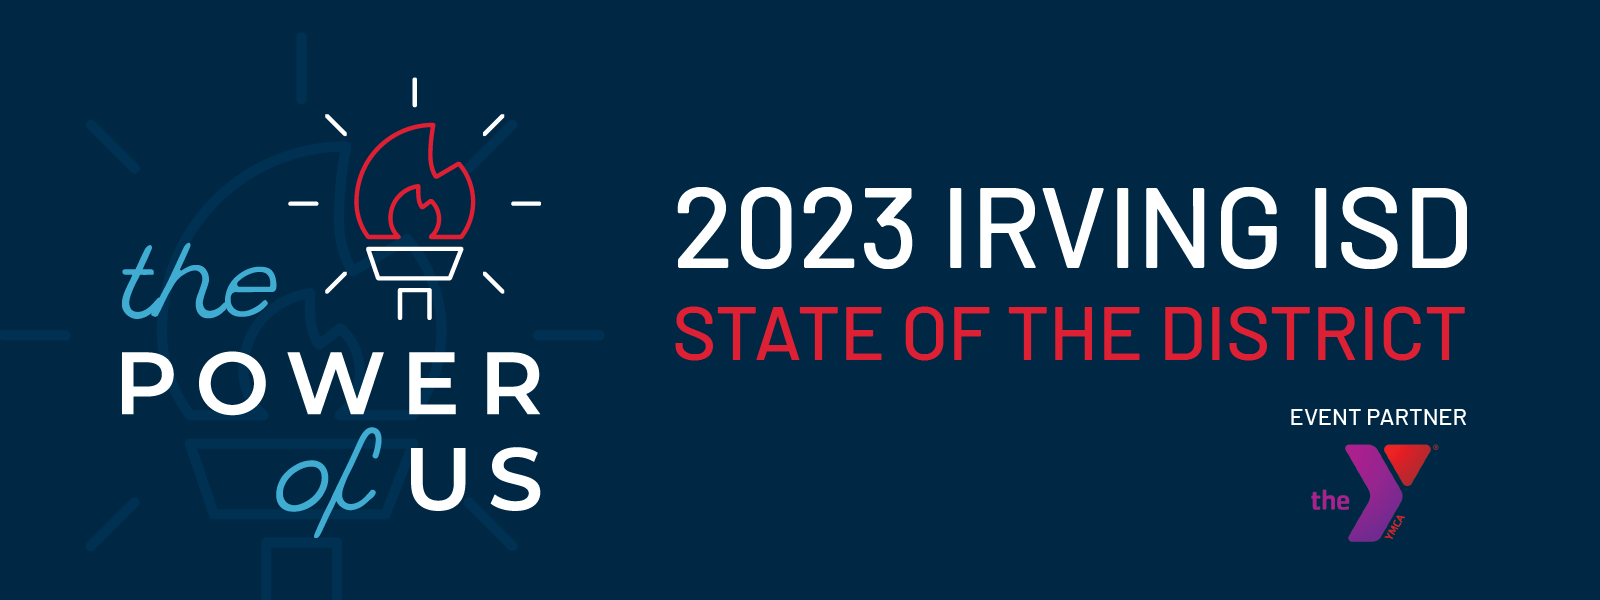 2023 Irving ISD State of the District